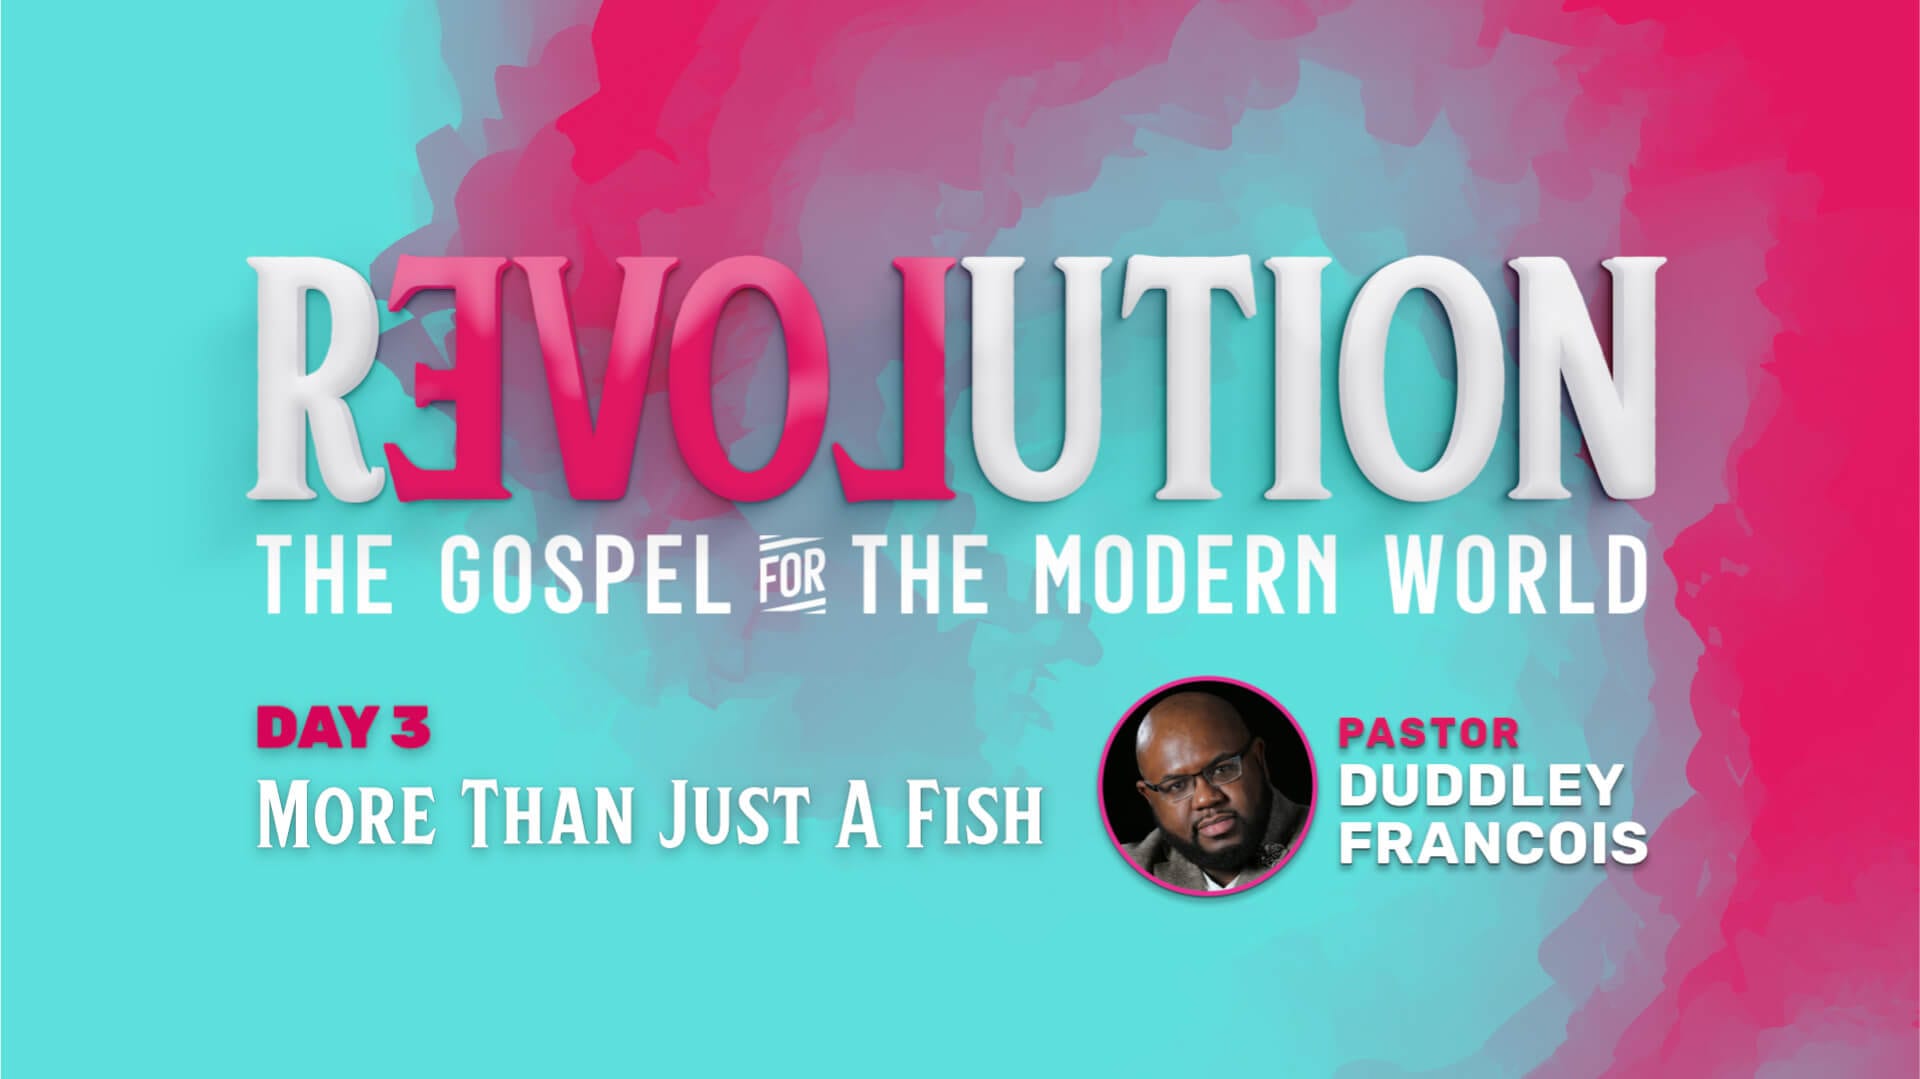 rEVOLution - DAY 3 - More Than Just a Fish 2 - Duddley Francois